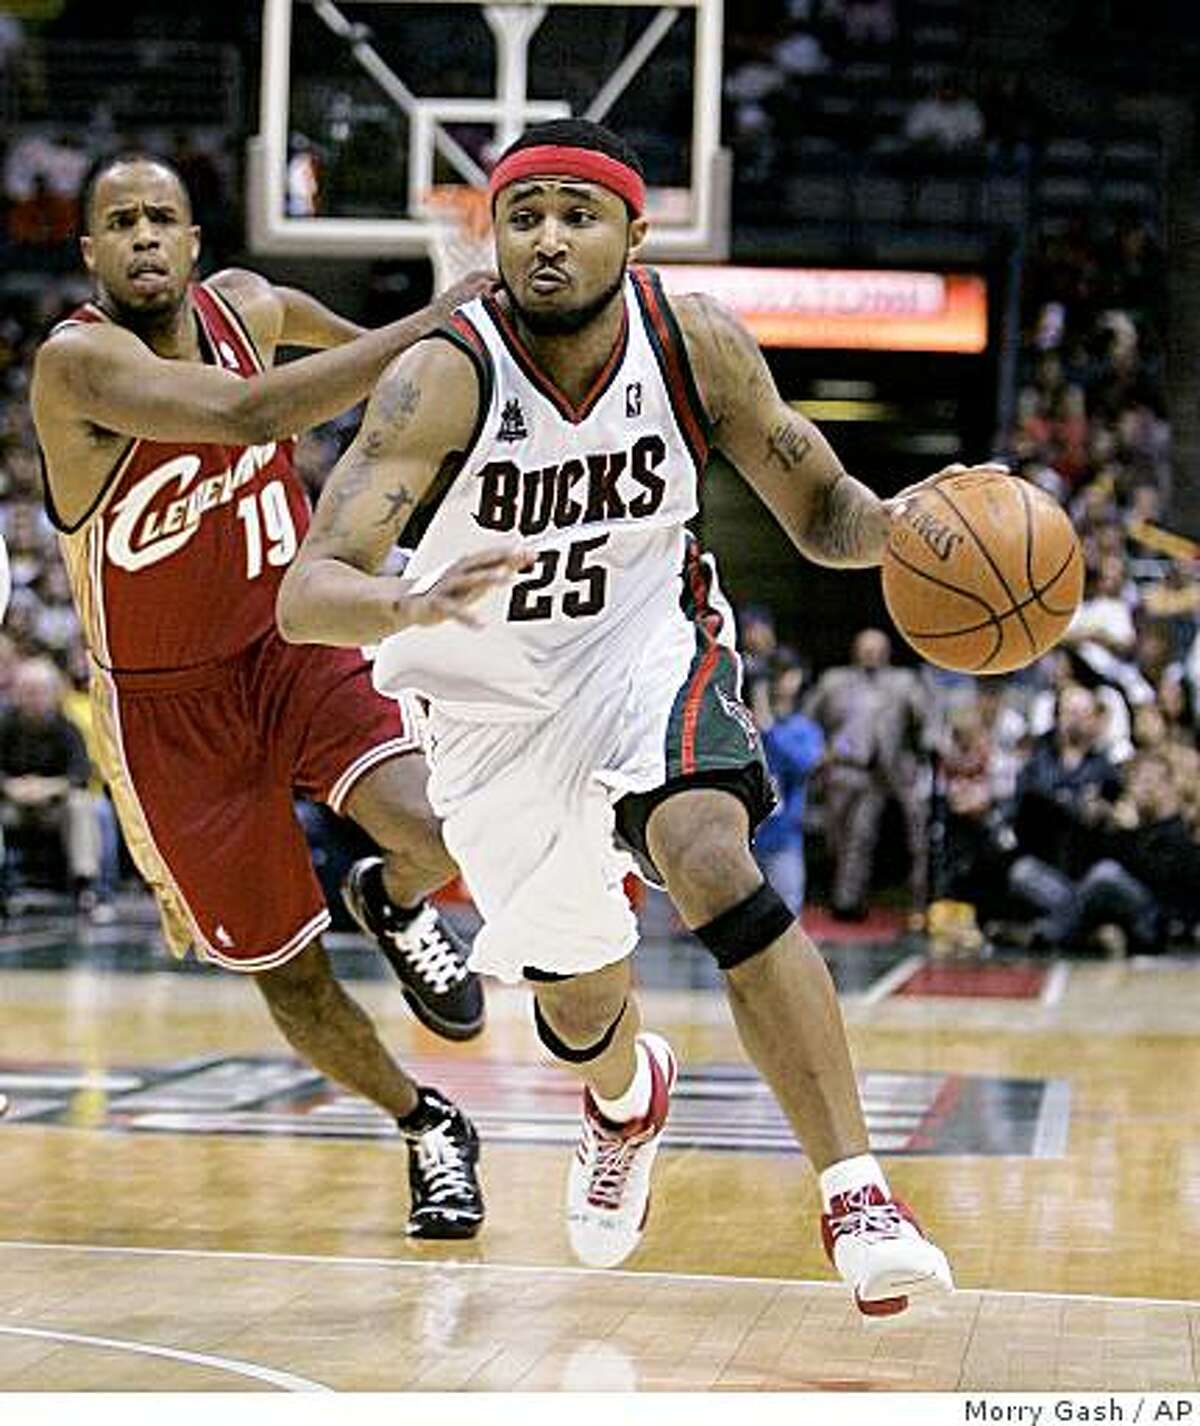 ** FILE ** In this March 22, 2008 file photo, Milwaukee Bucks' Mo Williams drives past Cleveland Cavaliers' Damon Jones (19) during the second half of an NBA basketball game in Milwaukee. The high-scoring Milwaukee point guard Mo Williams has been traded to Cleveland as part of a three-team trade that also involves Oklahoma City. The six-player deal was completed Wednesday, Aug. 13, 2008. (AP Photo/Morry Gash, File)